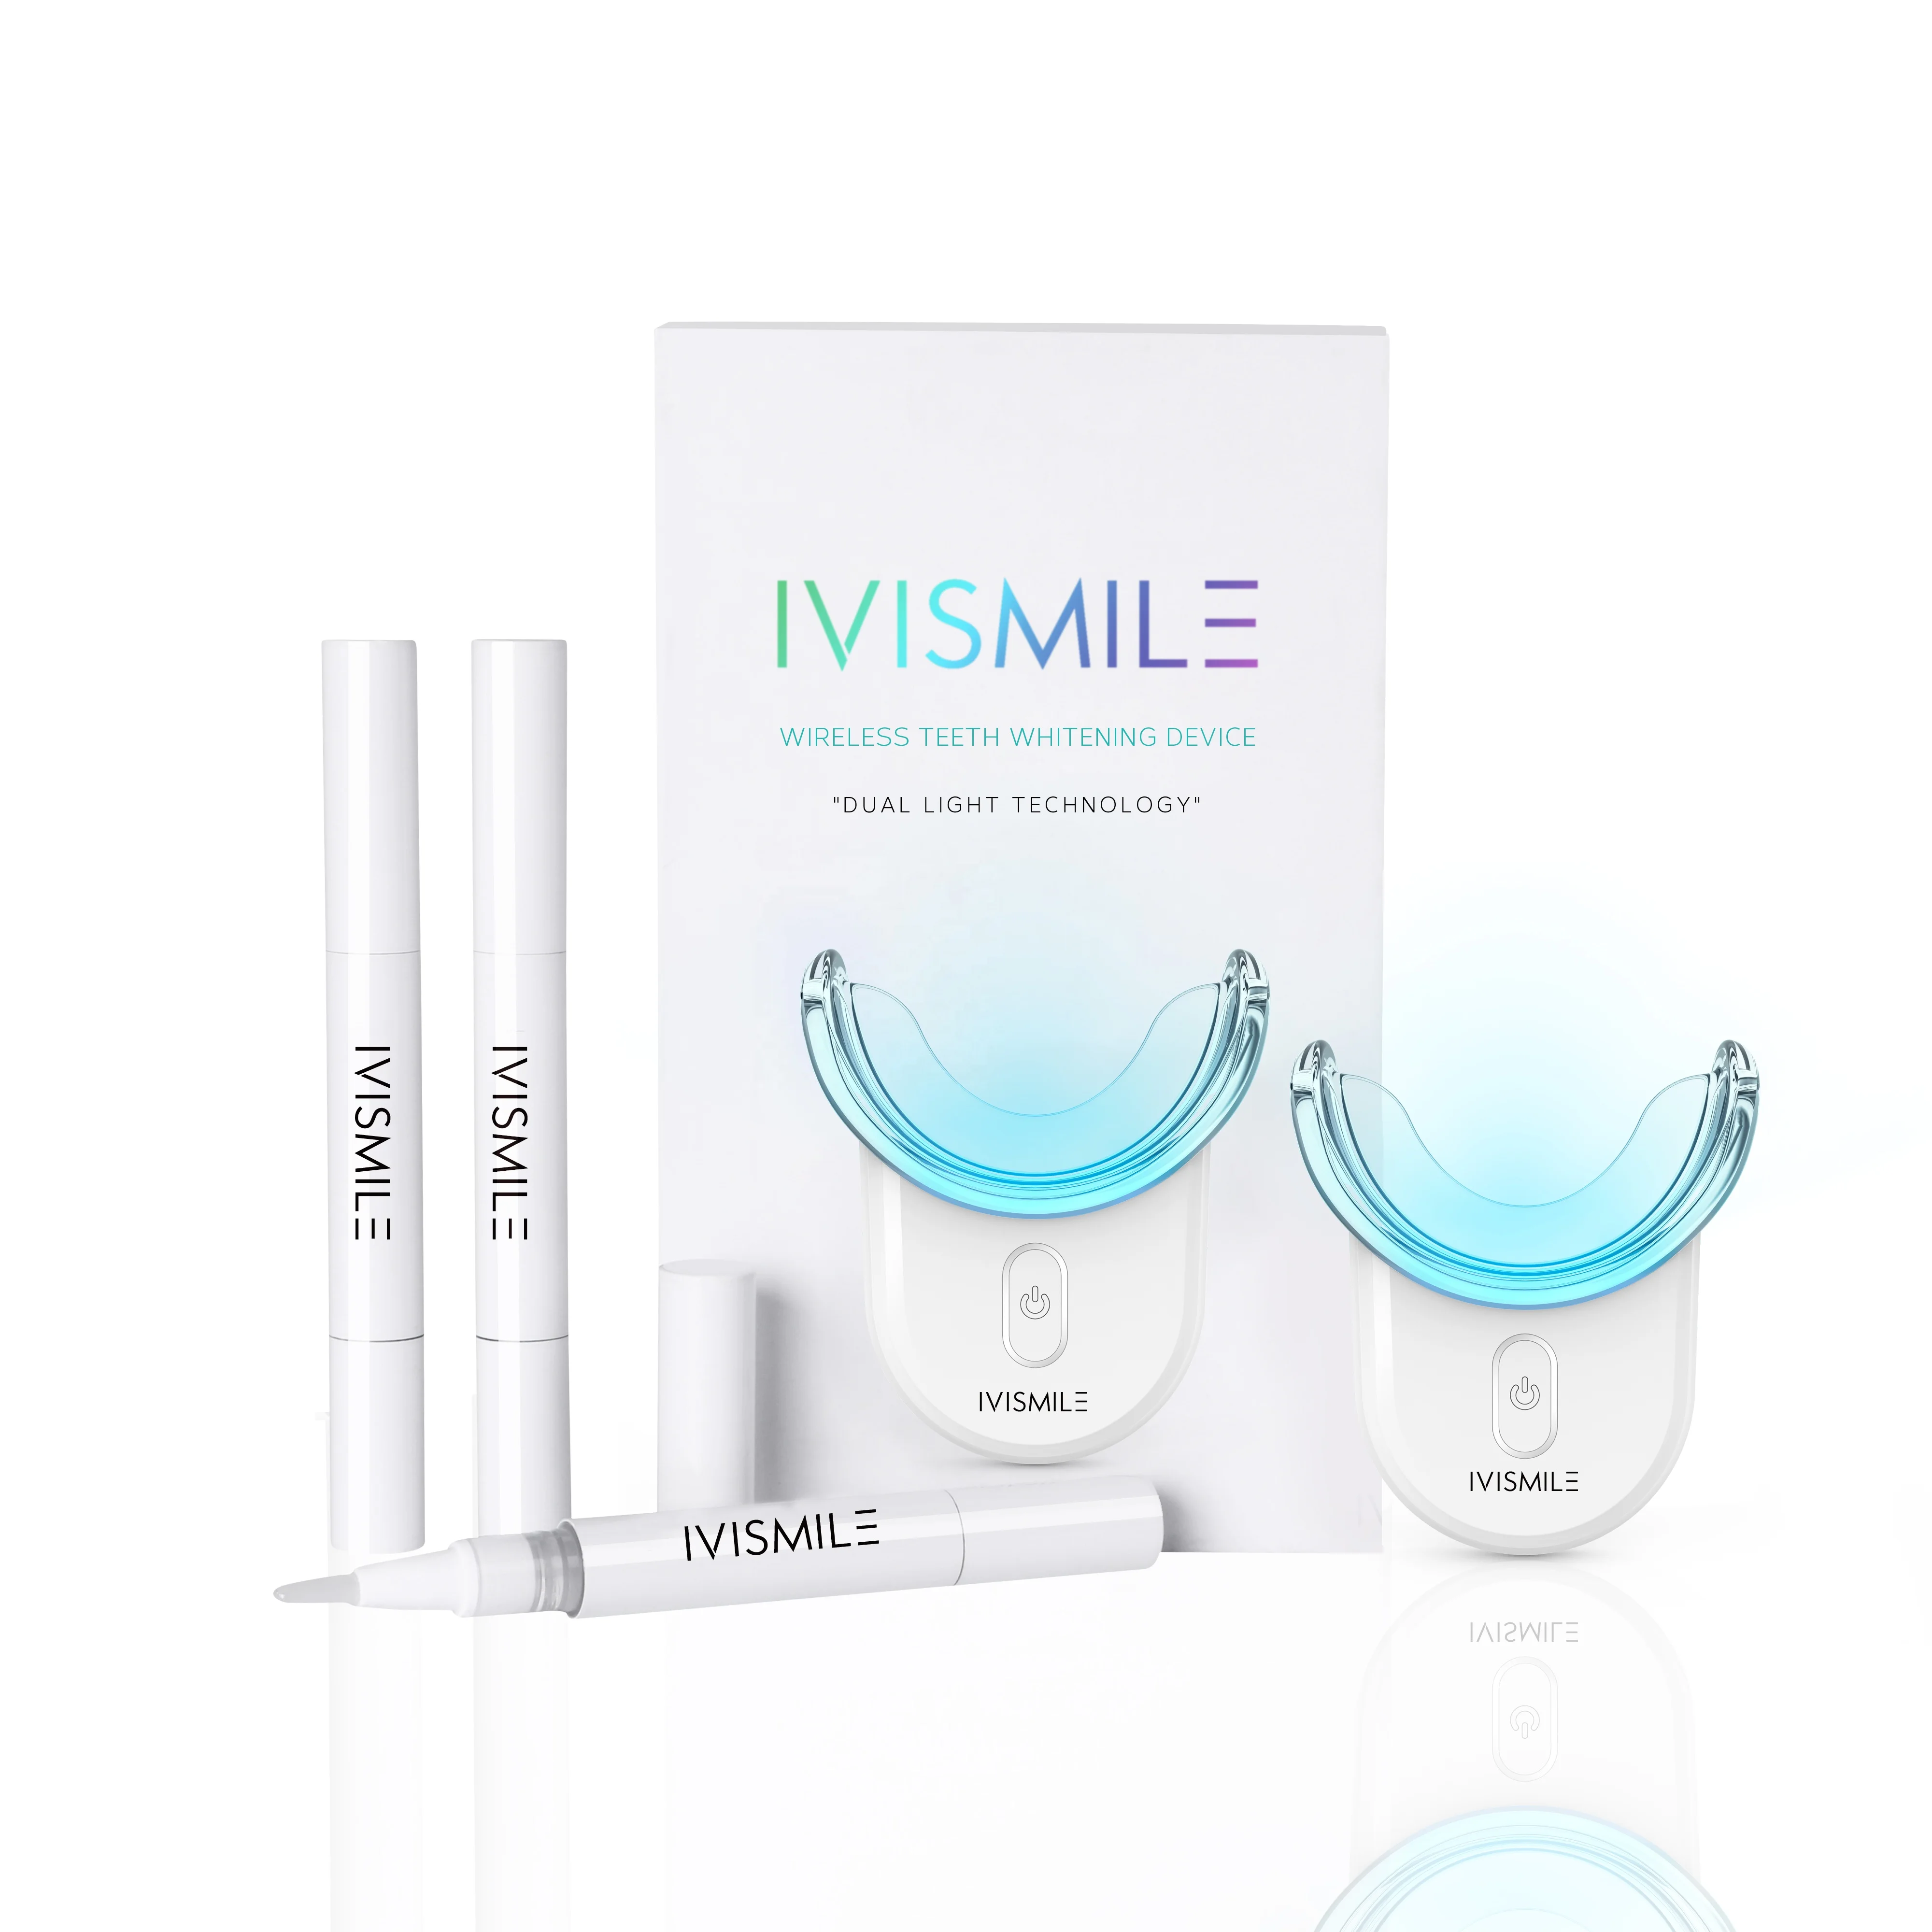 

2020 New Tooth Bleaching Kits Home Use IVISMILE Wireless Teeth Whitening Led Kit Private Logo